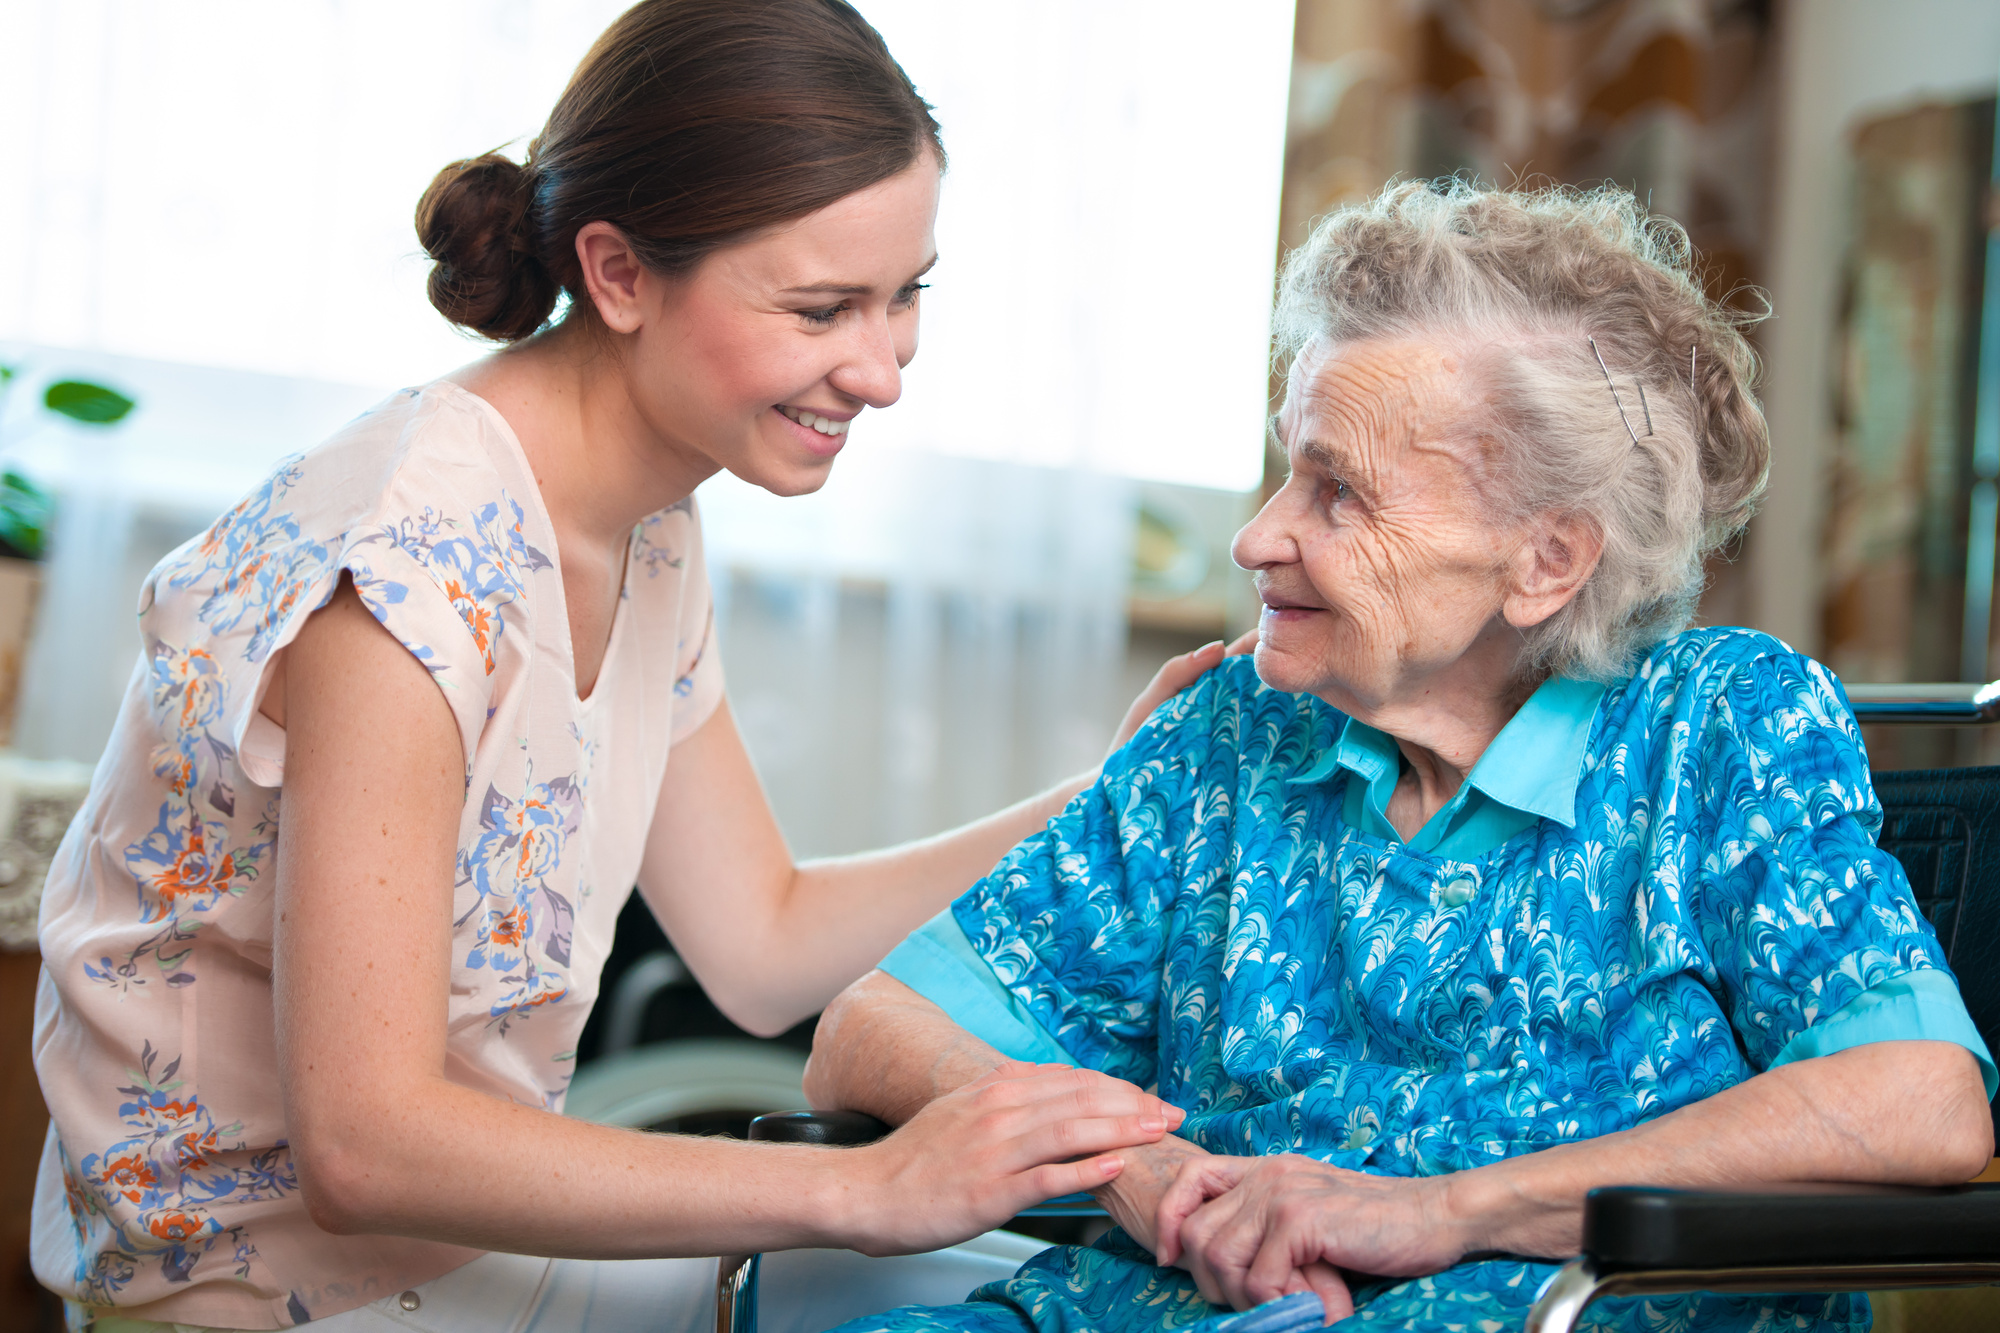 Elderly Care And Safety 